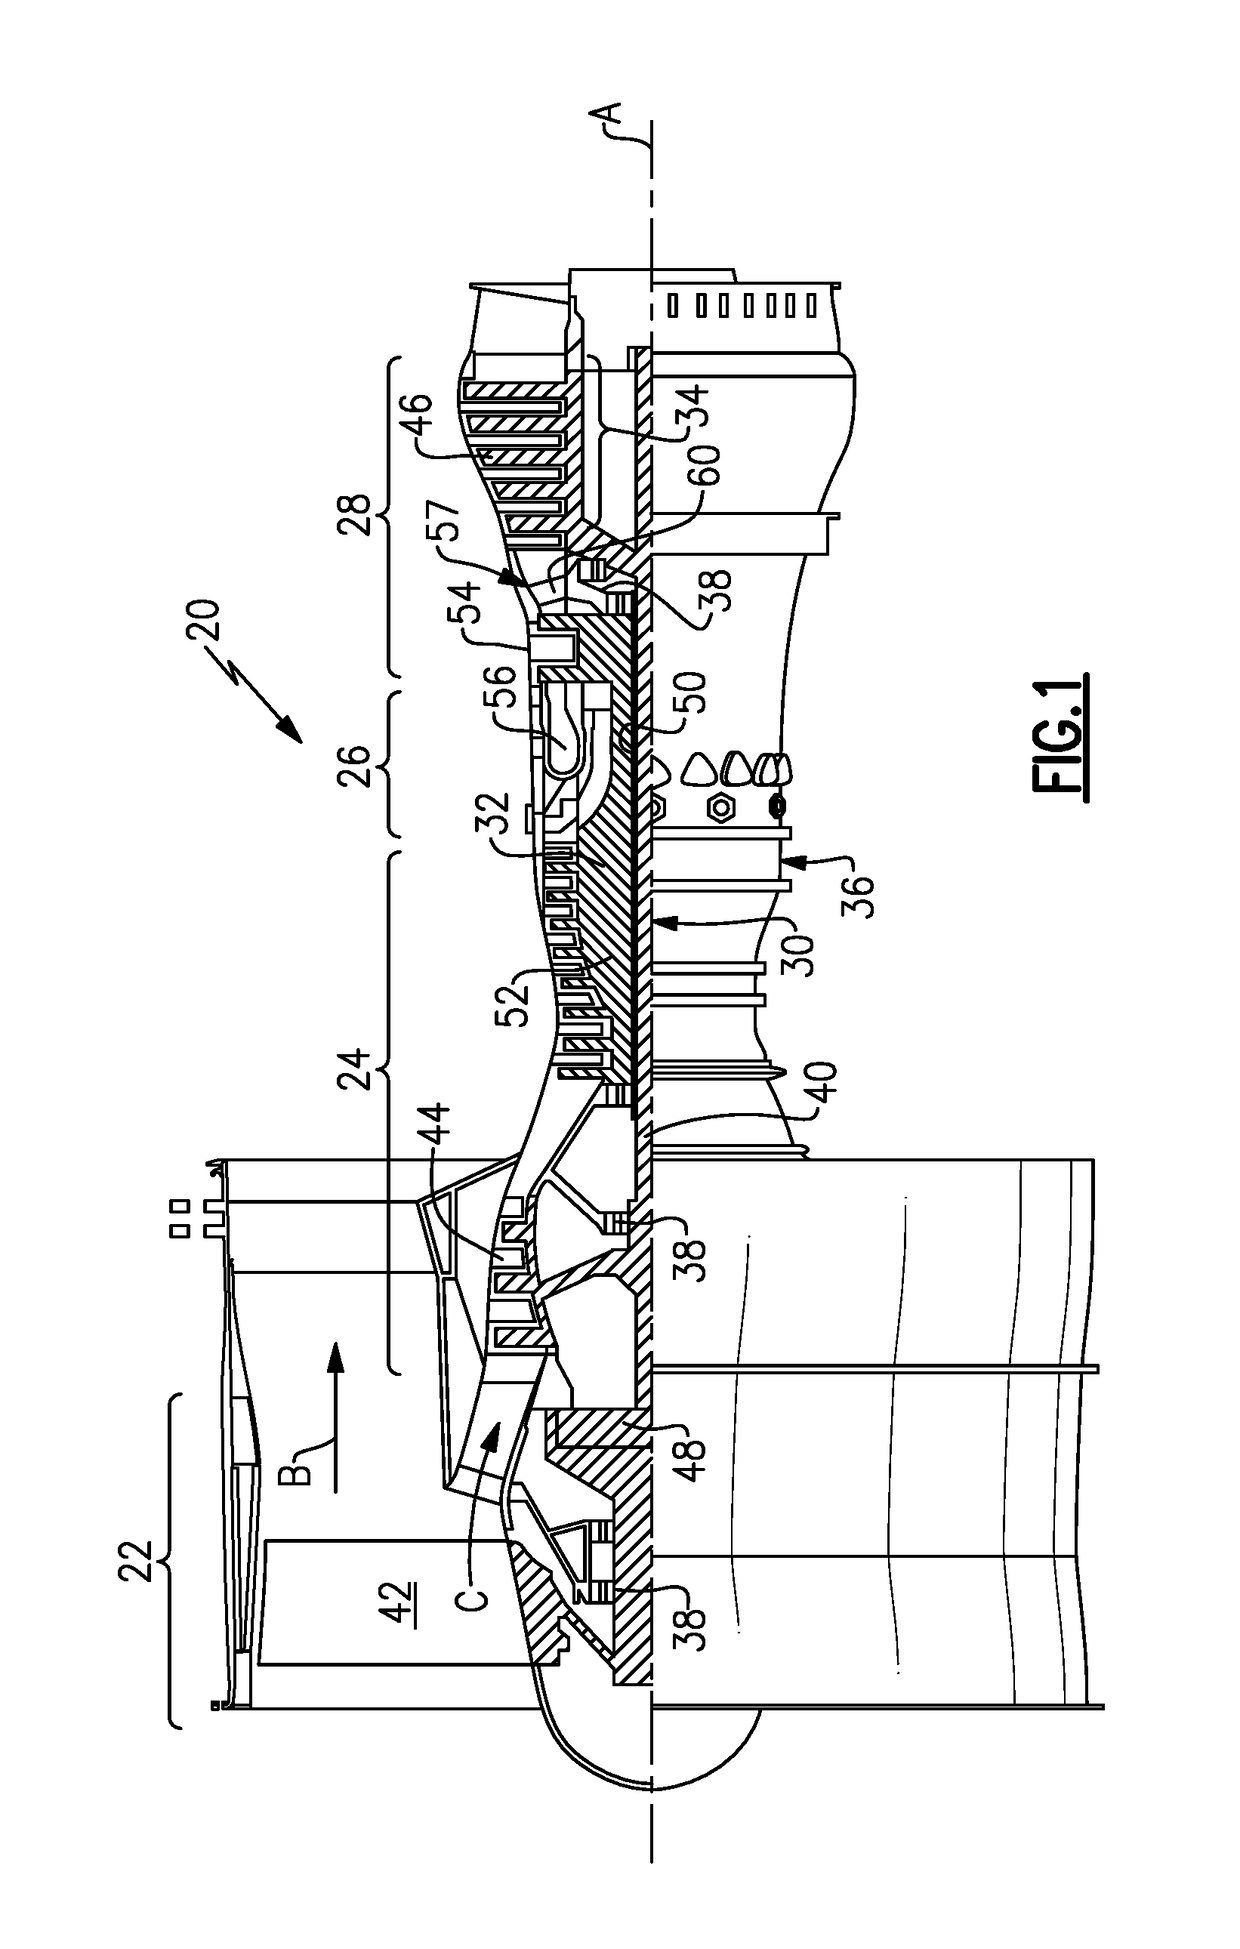 Method and Apparatus to Enhance Laminar Flow for Gas Turbine Engine Components